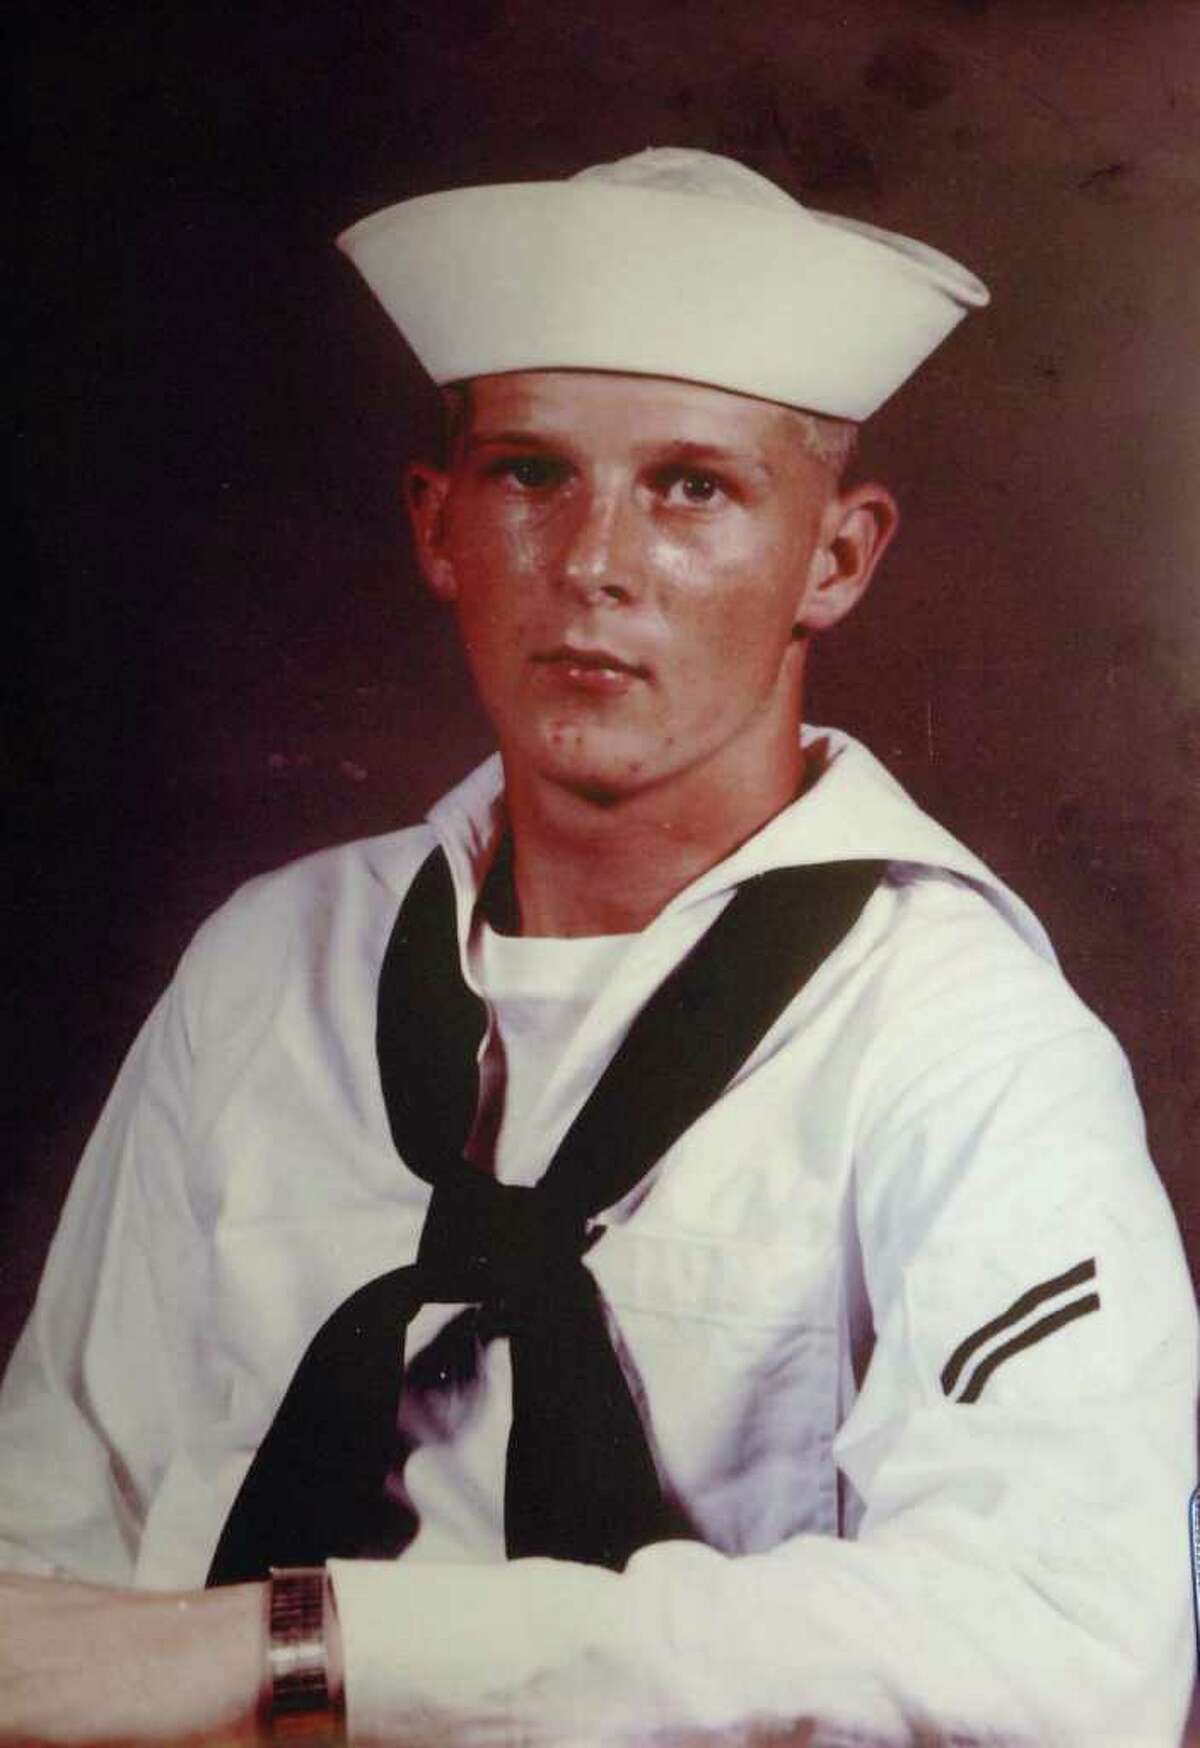 PHOTO COURTESY THE BACON FAMILY -- David Bacon, who was a Navy veteran of Vietnam, and who was 22 years old on April 10, 1969, when he was last seen. Times Union